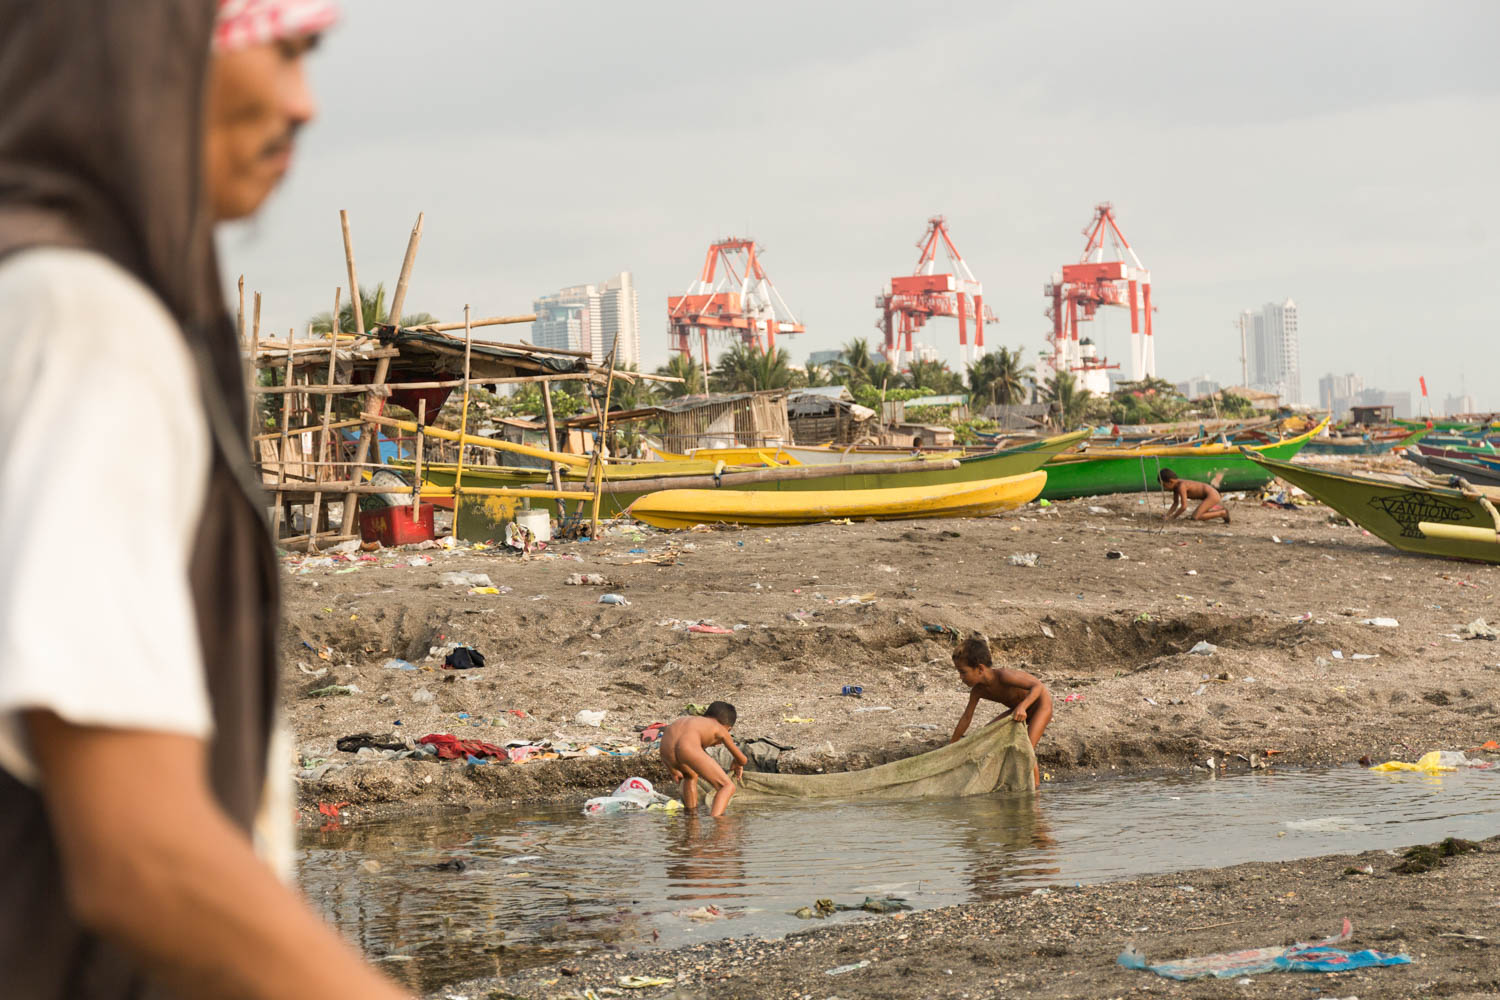 Baseco is an informal neighborhood of Manila located between the international port and the Pasig river. More than 50 000 people are living there in very precarious conditions.  The beach is a very active place. Mens are going to fish, others maintaining their boats or fish nets. Children are playing to catch fishes or digging holes in the sand. Manila, Philippines - 13/01/2016.